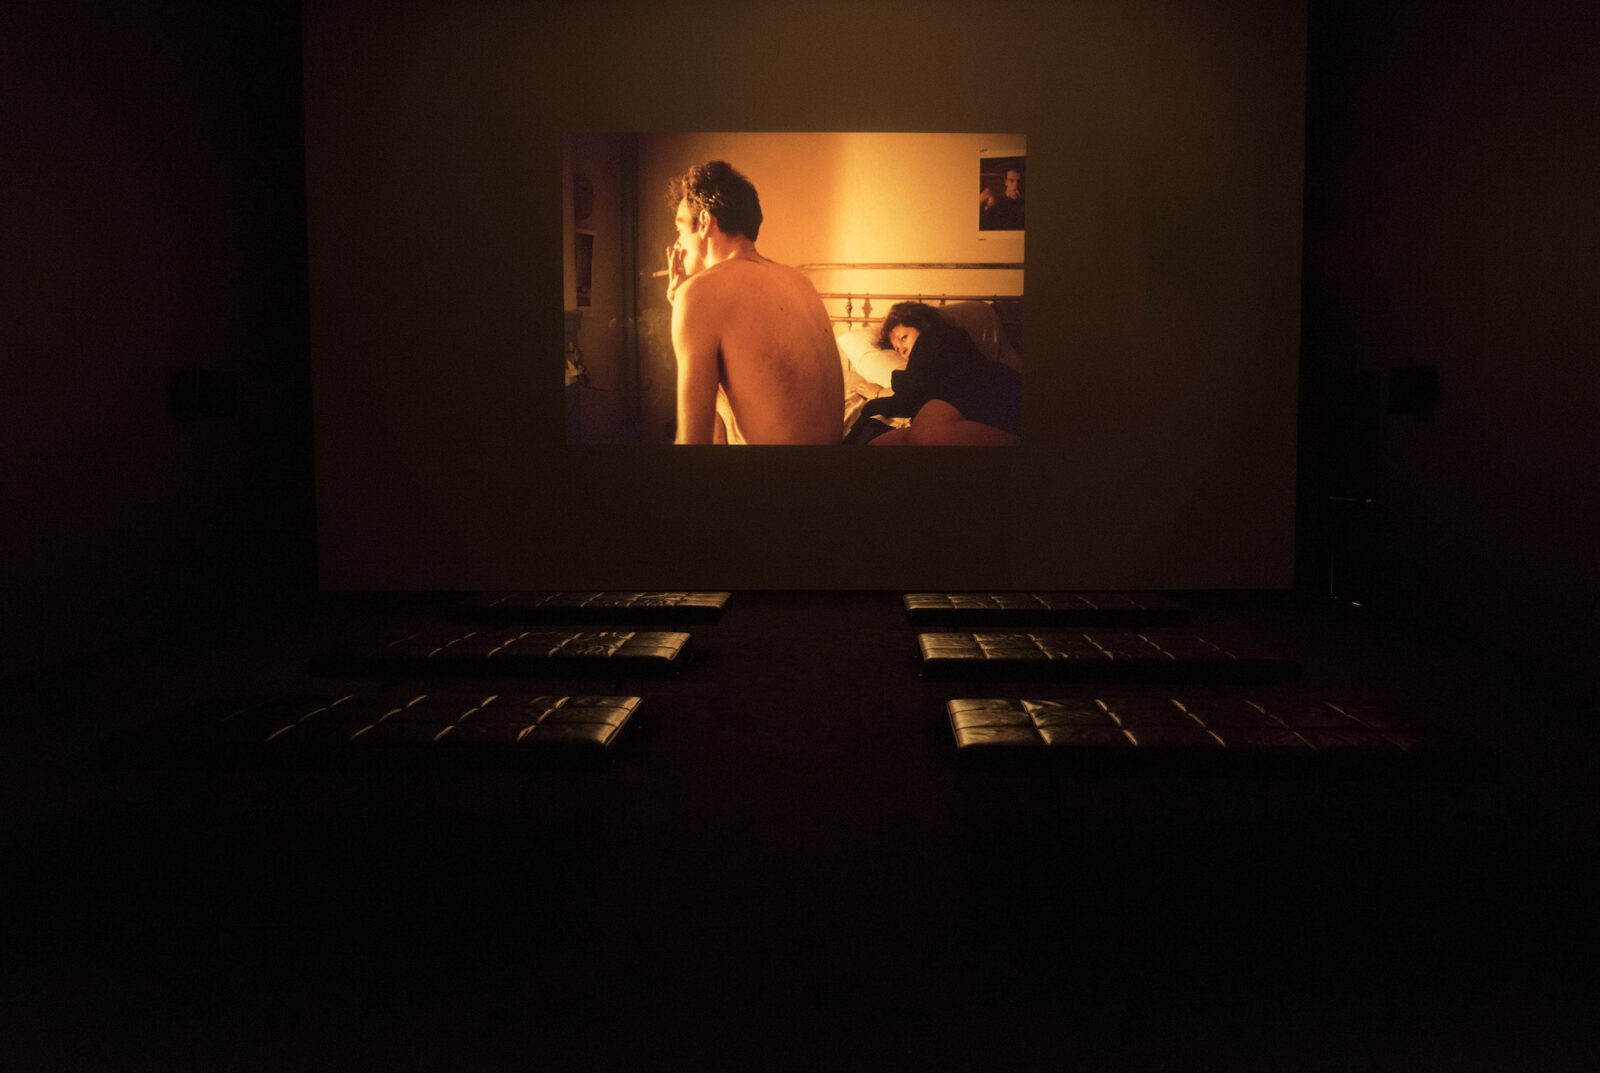 Nan Goldin
The Ballad of Sexual Dependency, 1979–2004
Slideshow with soundtrack, 43 min.
Museum of Modern Art, New York
Installation view, &quot;Nan Goldin: The Ballad of Sexual Dependency,&quot; Museum of Modern Art, New York, June 11, 2016–April 16, 2017
© Nan Goldin
Photo: John Wronn
Courtesy the artist and Gagosian